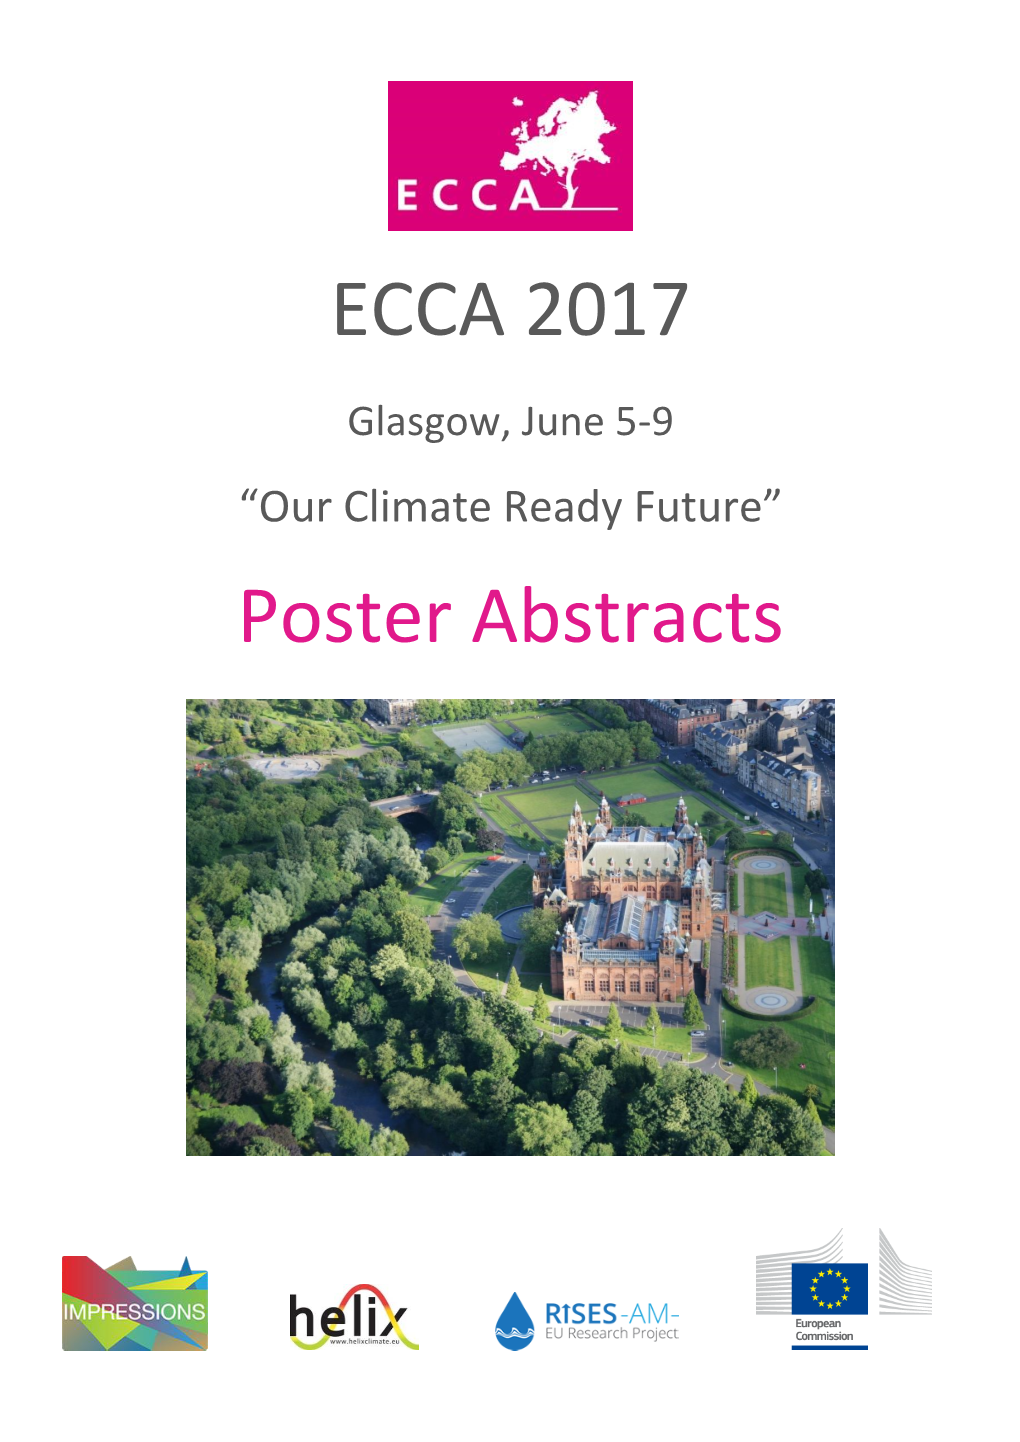 ECCA 2017 Poster Abstracts